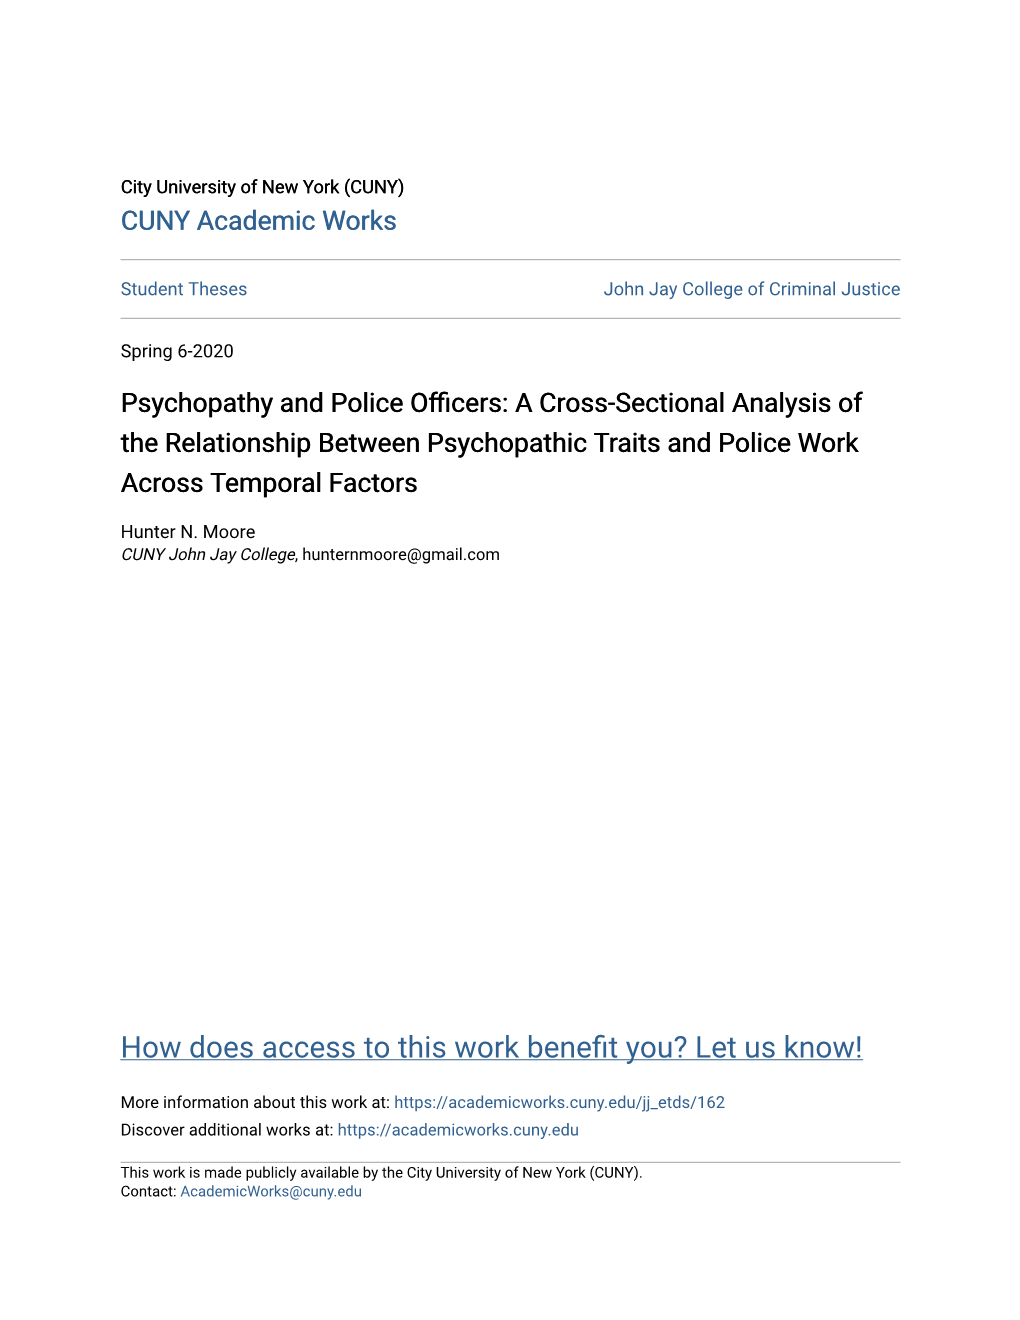 Psychopathy and Police Officers: a Cross-Sectional Analysis of the Relationship Between